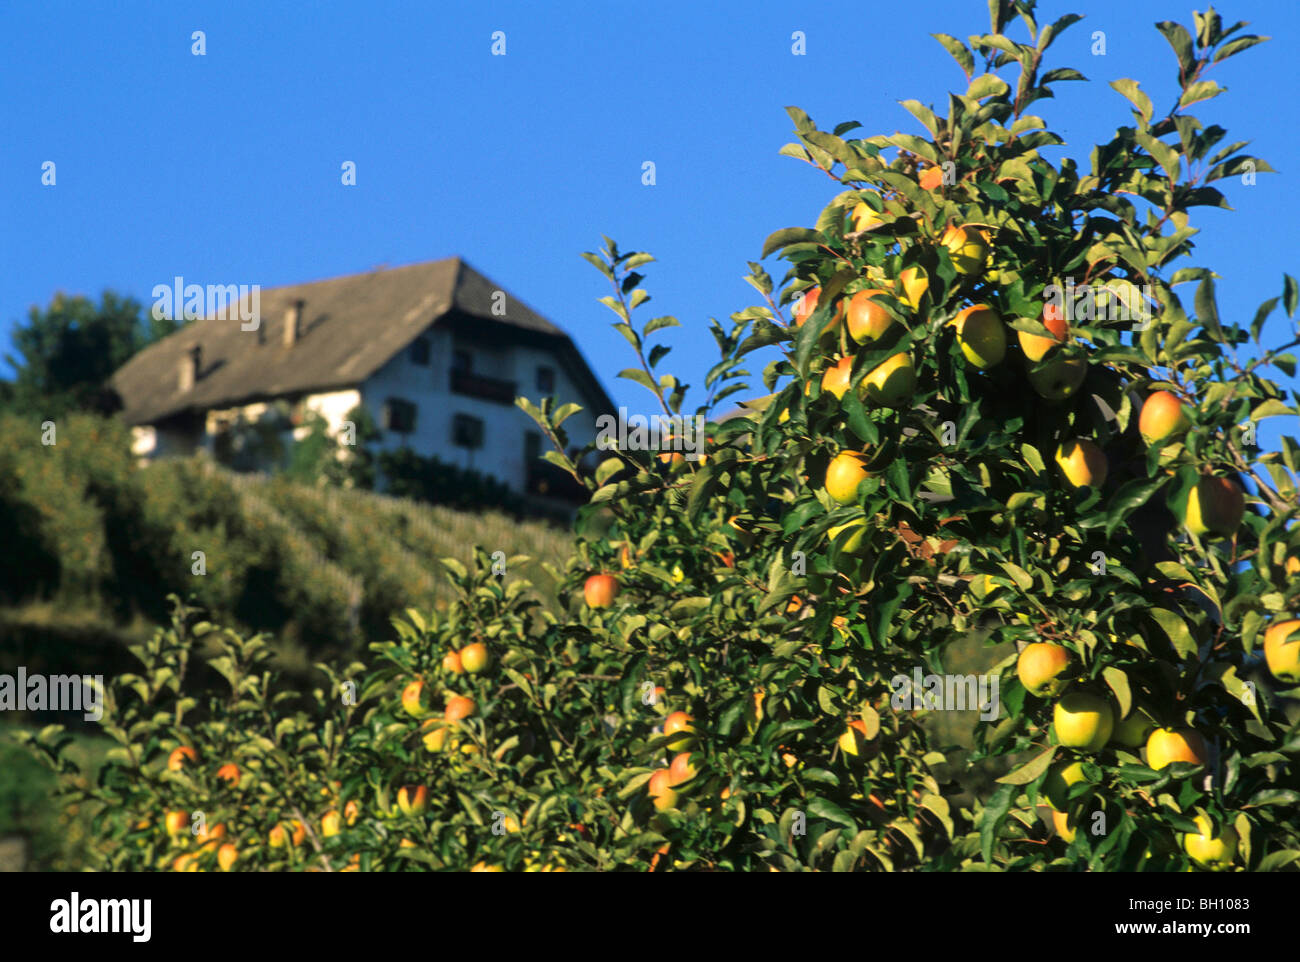 Apples on an apple tree, Golden Delicious, Fruit Farming, Agriculture, Unterinn, Bolzano, South Tyrol, Italy Stock Photo